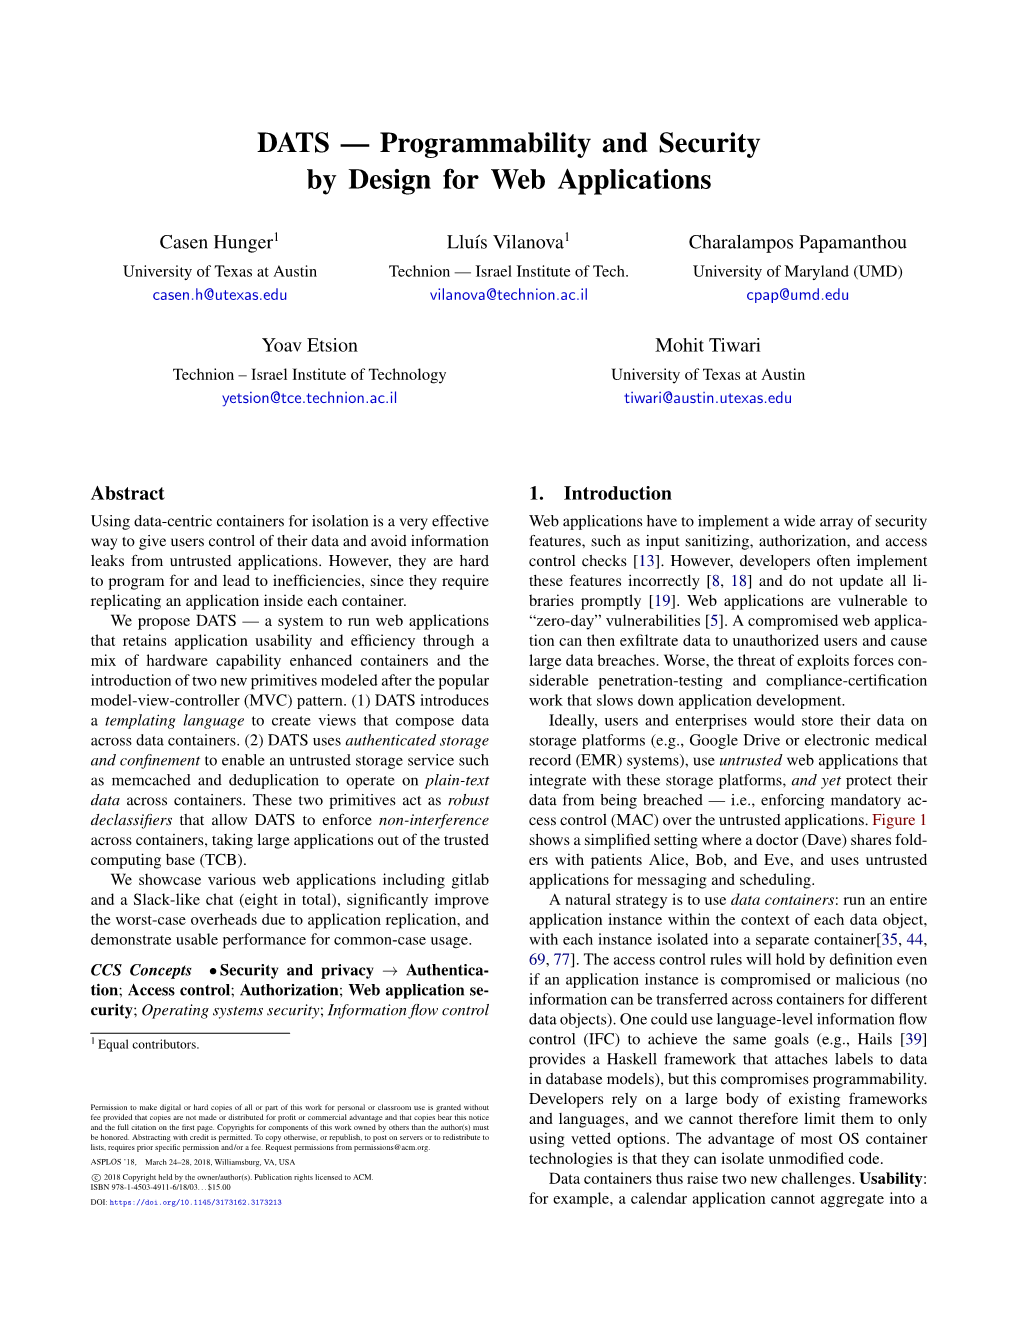 Programmability and Security by Design for Web Applications